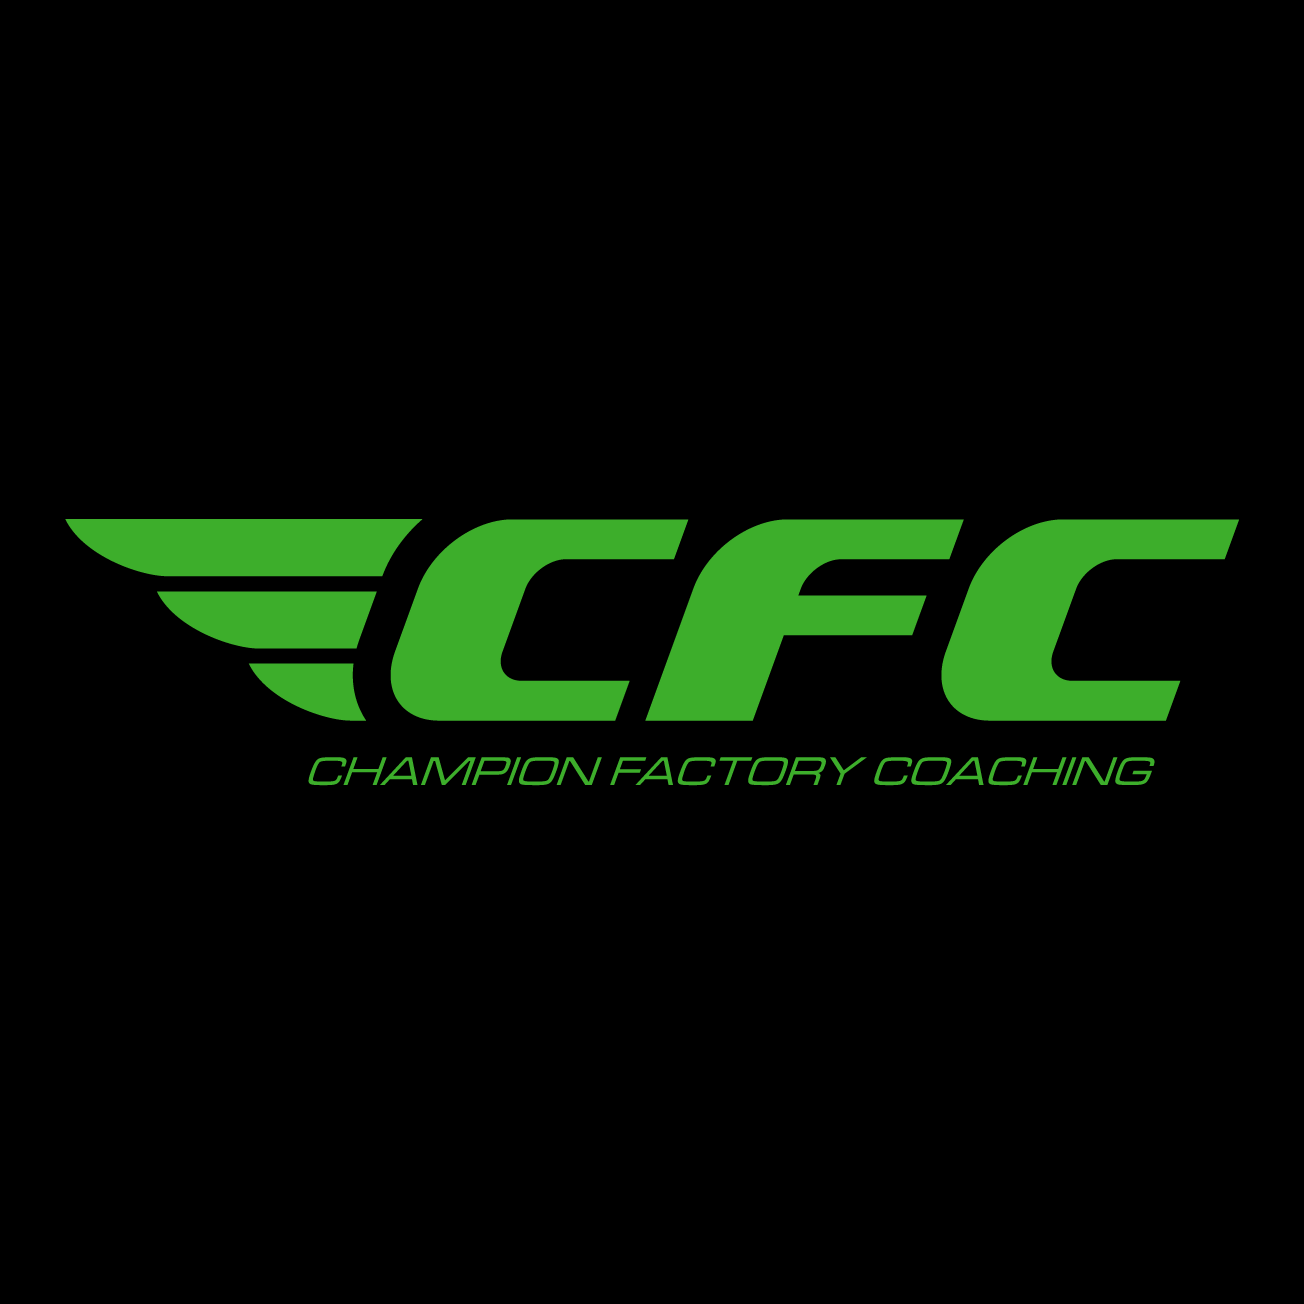 Club Image for CHAMPION FACTORY COACHING